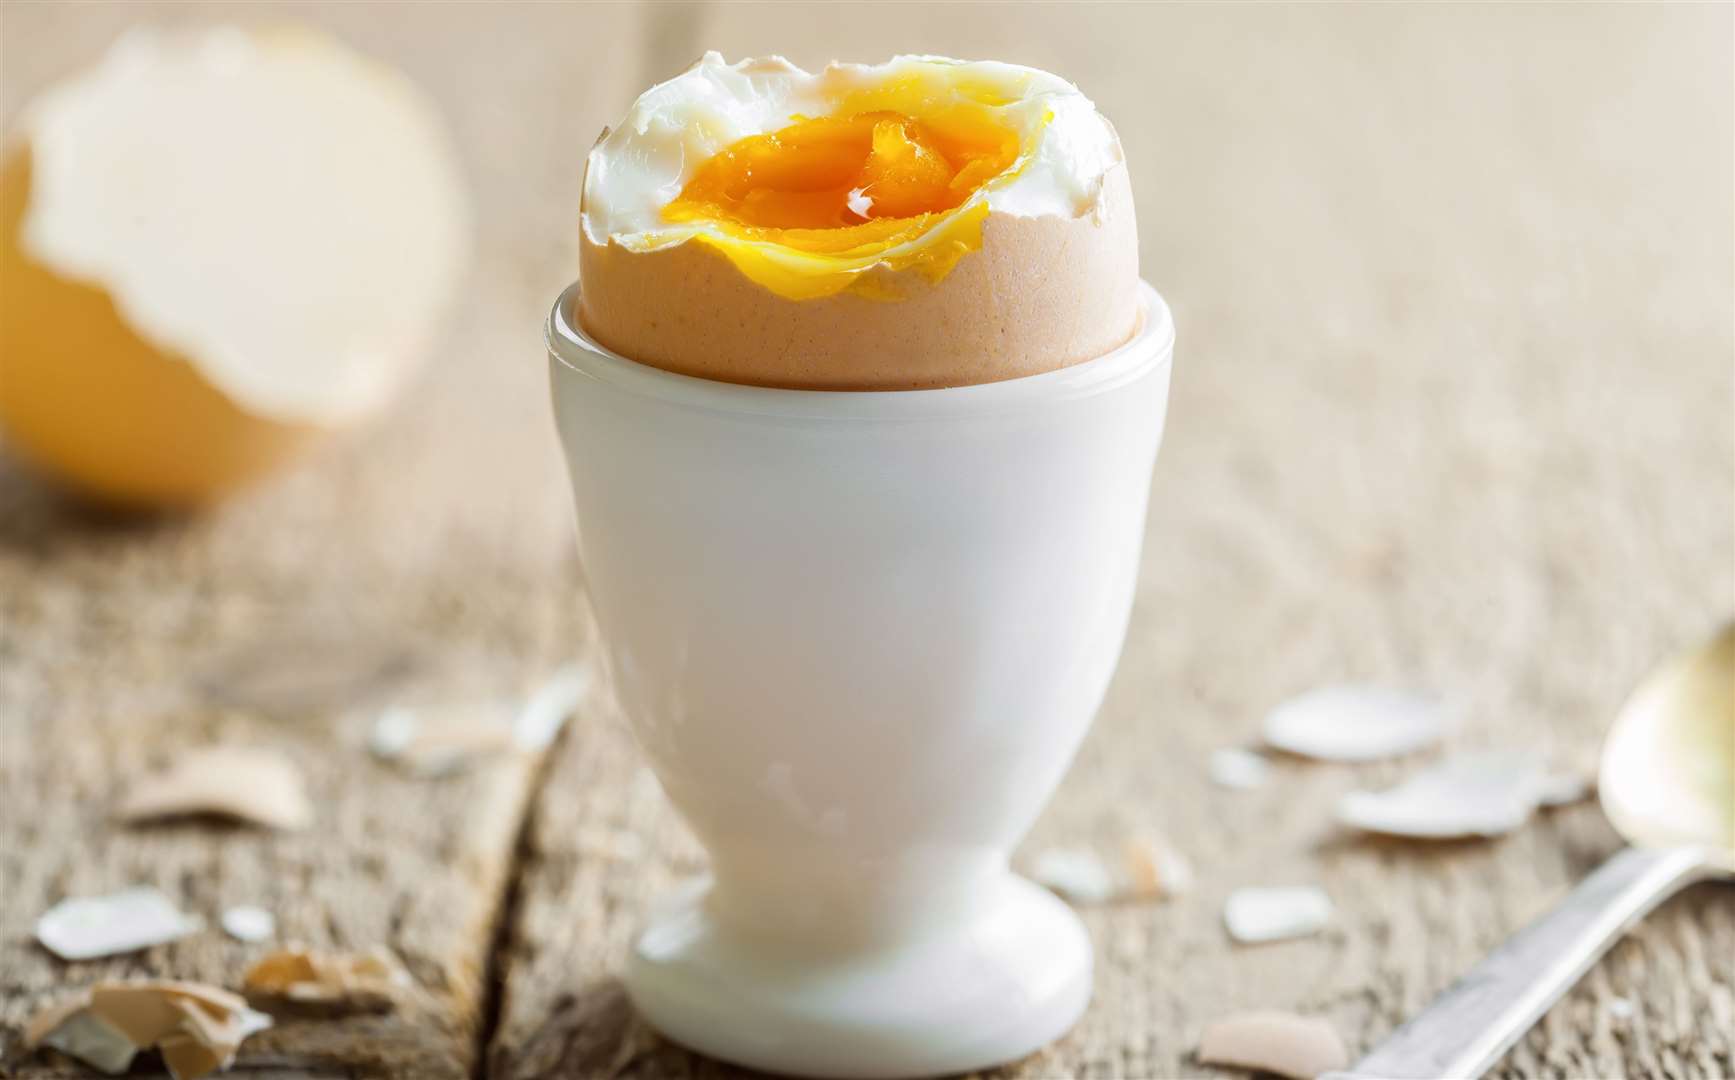 Babies, children, pregnant women, and older people should be cautious when eating runny or raw eggs. Image: iStock.